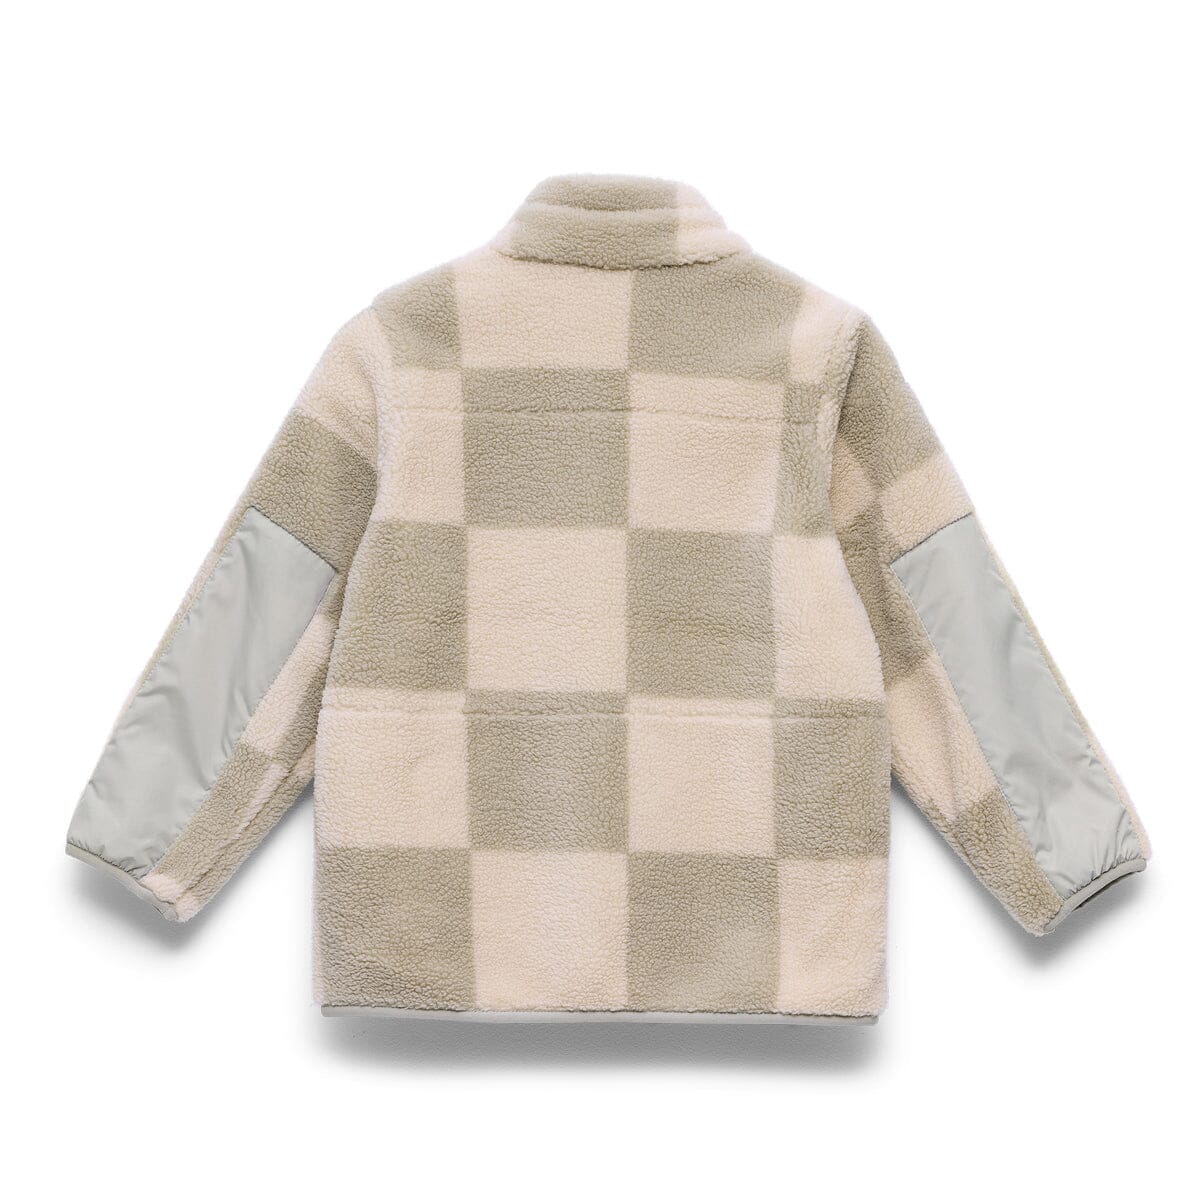 Crywolf | YETI JACKET - Moss Checkered *** PRE ORDER / DUE EARLY-MID APRIL *** Boys Crywolf